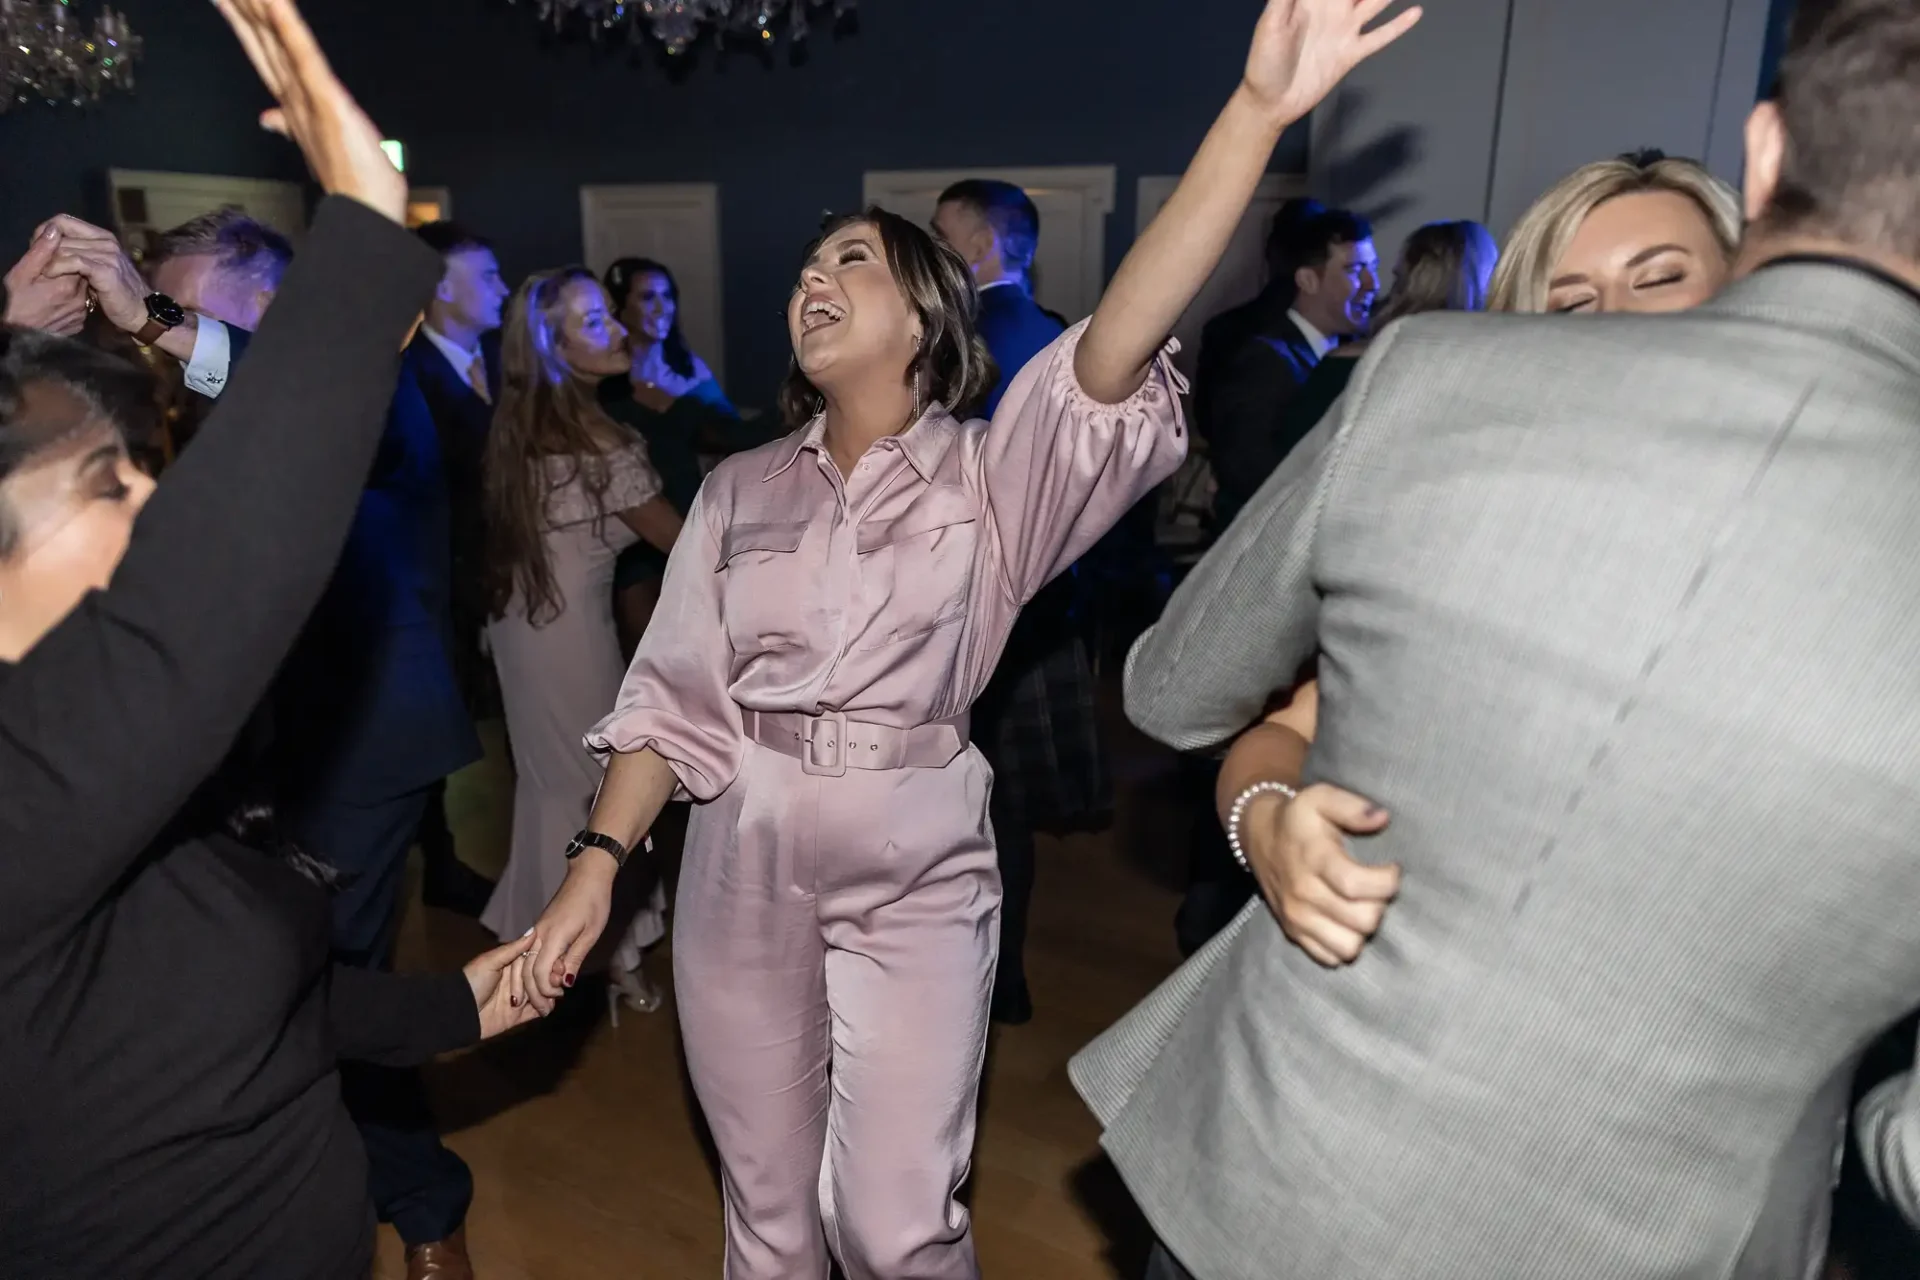 A woman in a pink jumpsuit laughing joyfully while dancing at a crowded party.